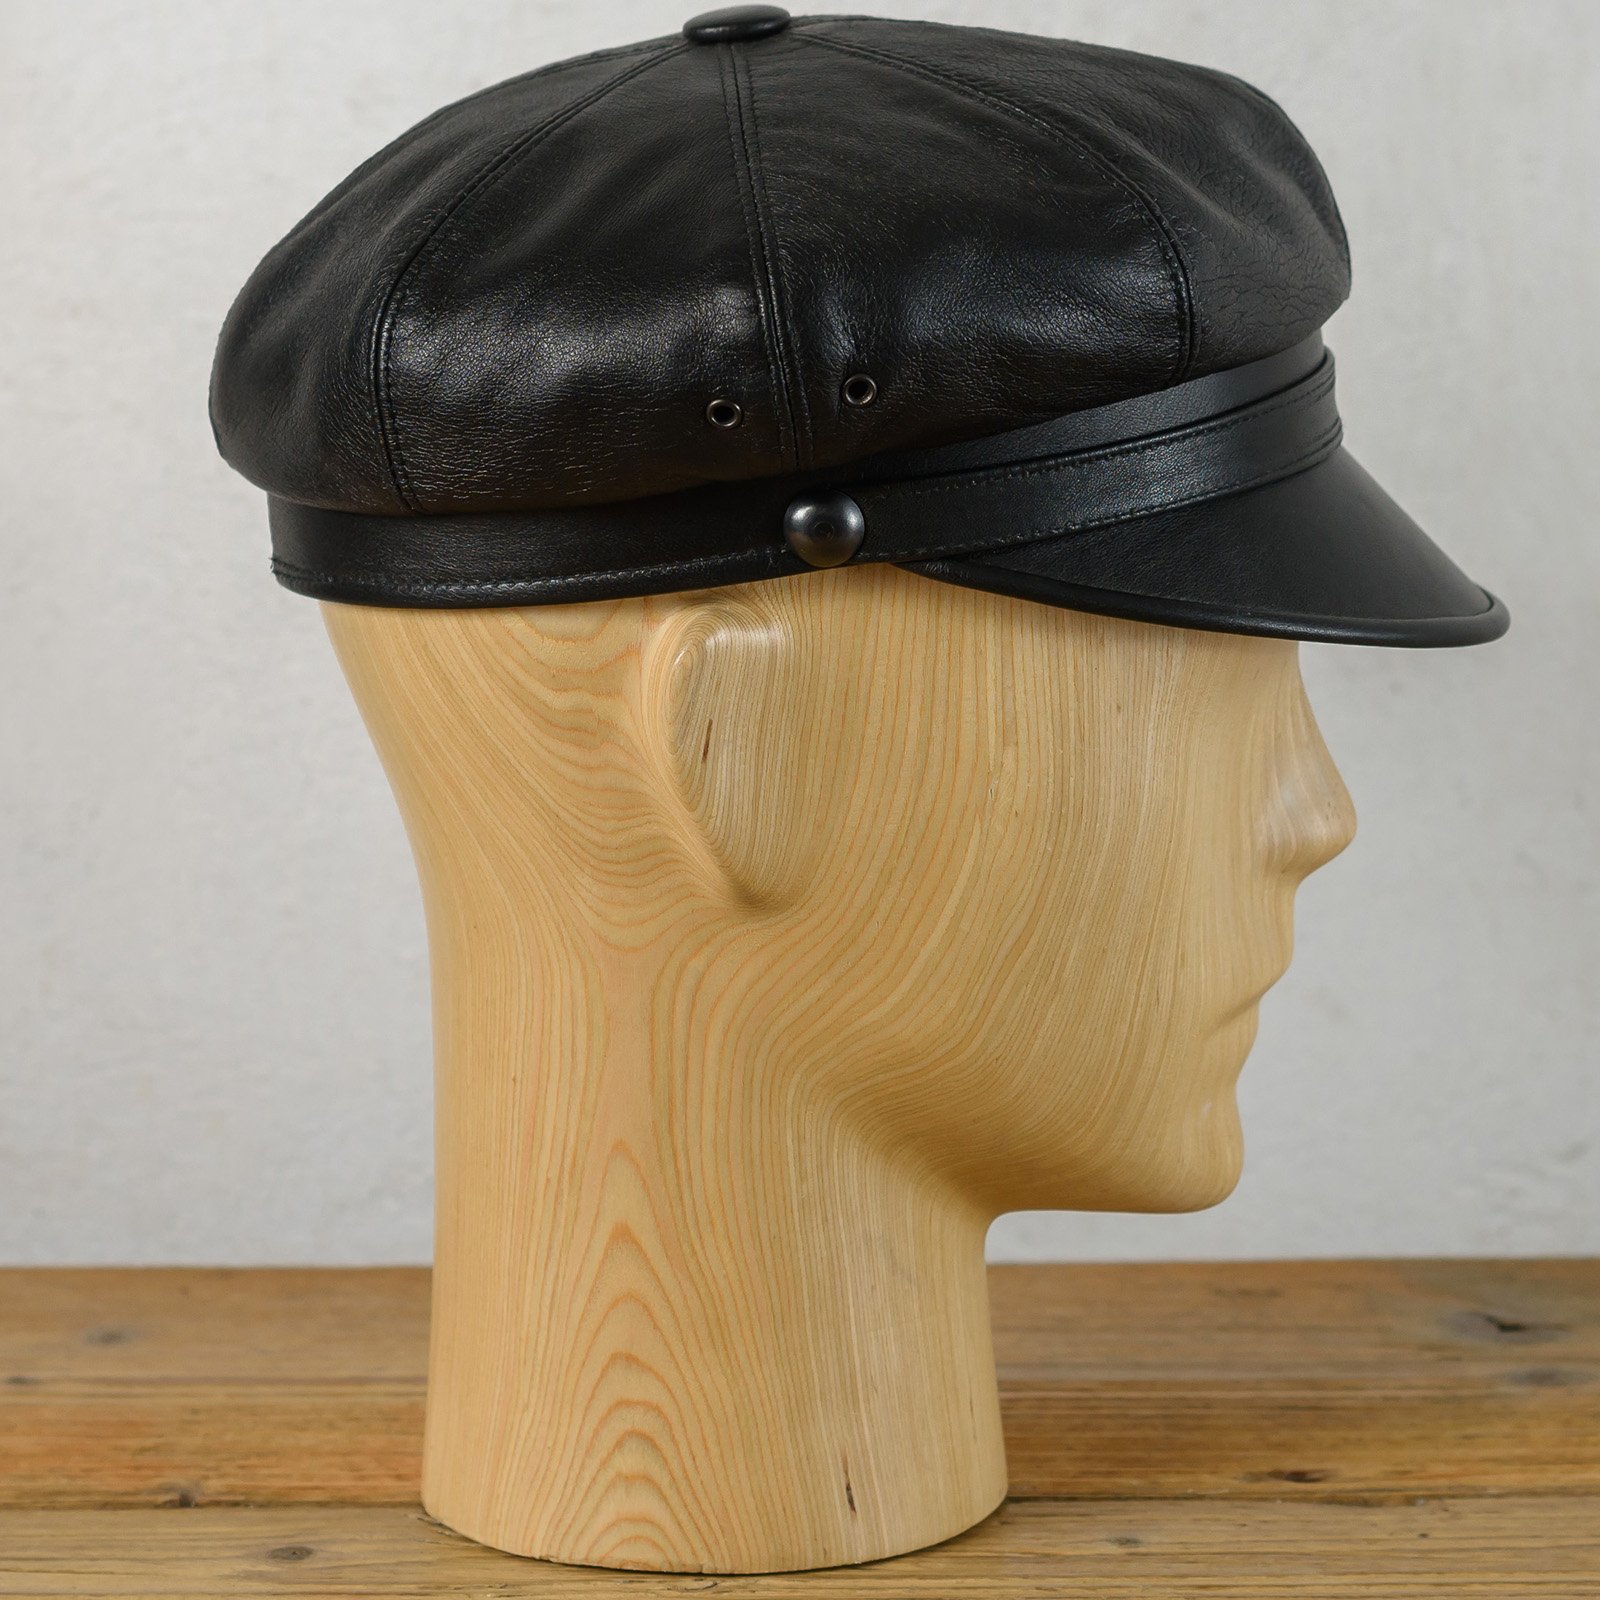 A Vintage Harely Style Motorcycle Hat Made Of Pure Natural Leather